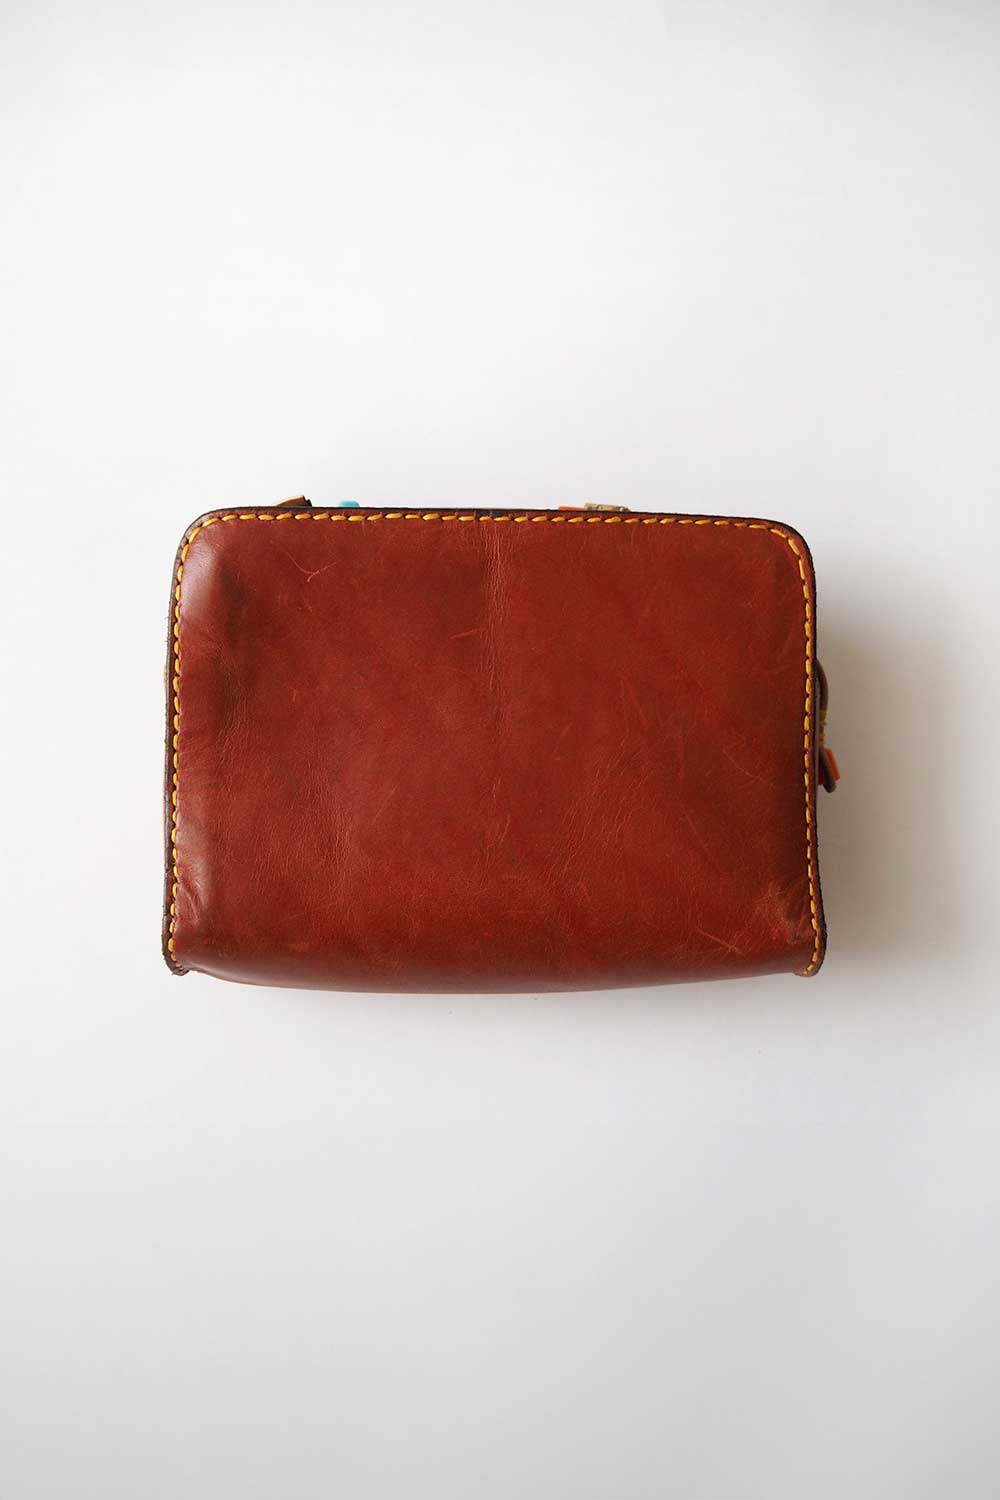 Henry Cuir、アンリークイール、leather goods、handcrafted leather、ハンドクラフト、made in Itary、ハンドメイド、手作り、handmade、ポーチ、pouch